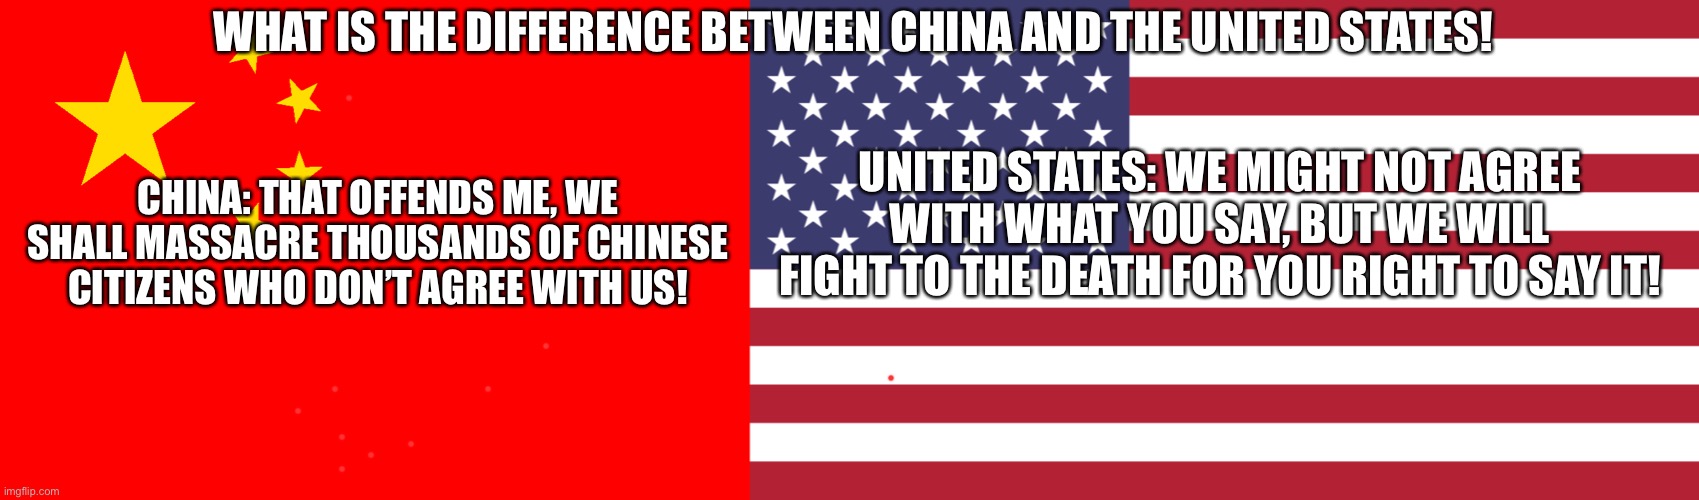 WHAT IS THE DIFFERENCE BETWEEN CHINA AND THE UNITED STATES! CHINA: THAT OFFENDS ME, WE SHALL MASSACRE THOUSANDS OF CHINESE CITIZENS WHO DON’T AGREE WITH US! UNITED STATES: WE MIGHT NOT AGREE WITH WHAT YOU SAY, BUT WE WILL FIGHT TO THE DEATH FOR YOU RIGHT TO SAY IT! | image tagged in united states,china,politics,meme | made w/ Imgflip meme maker